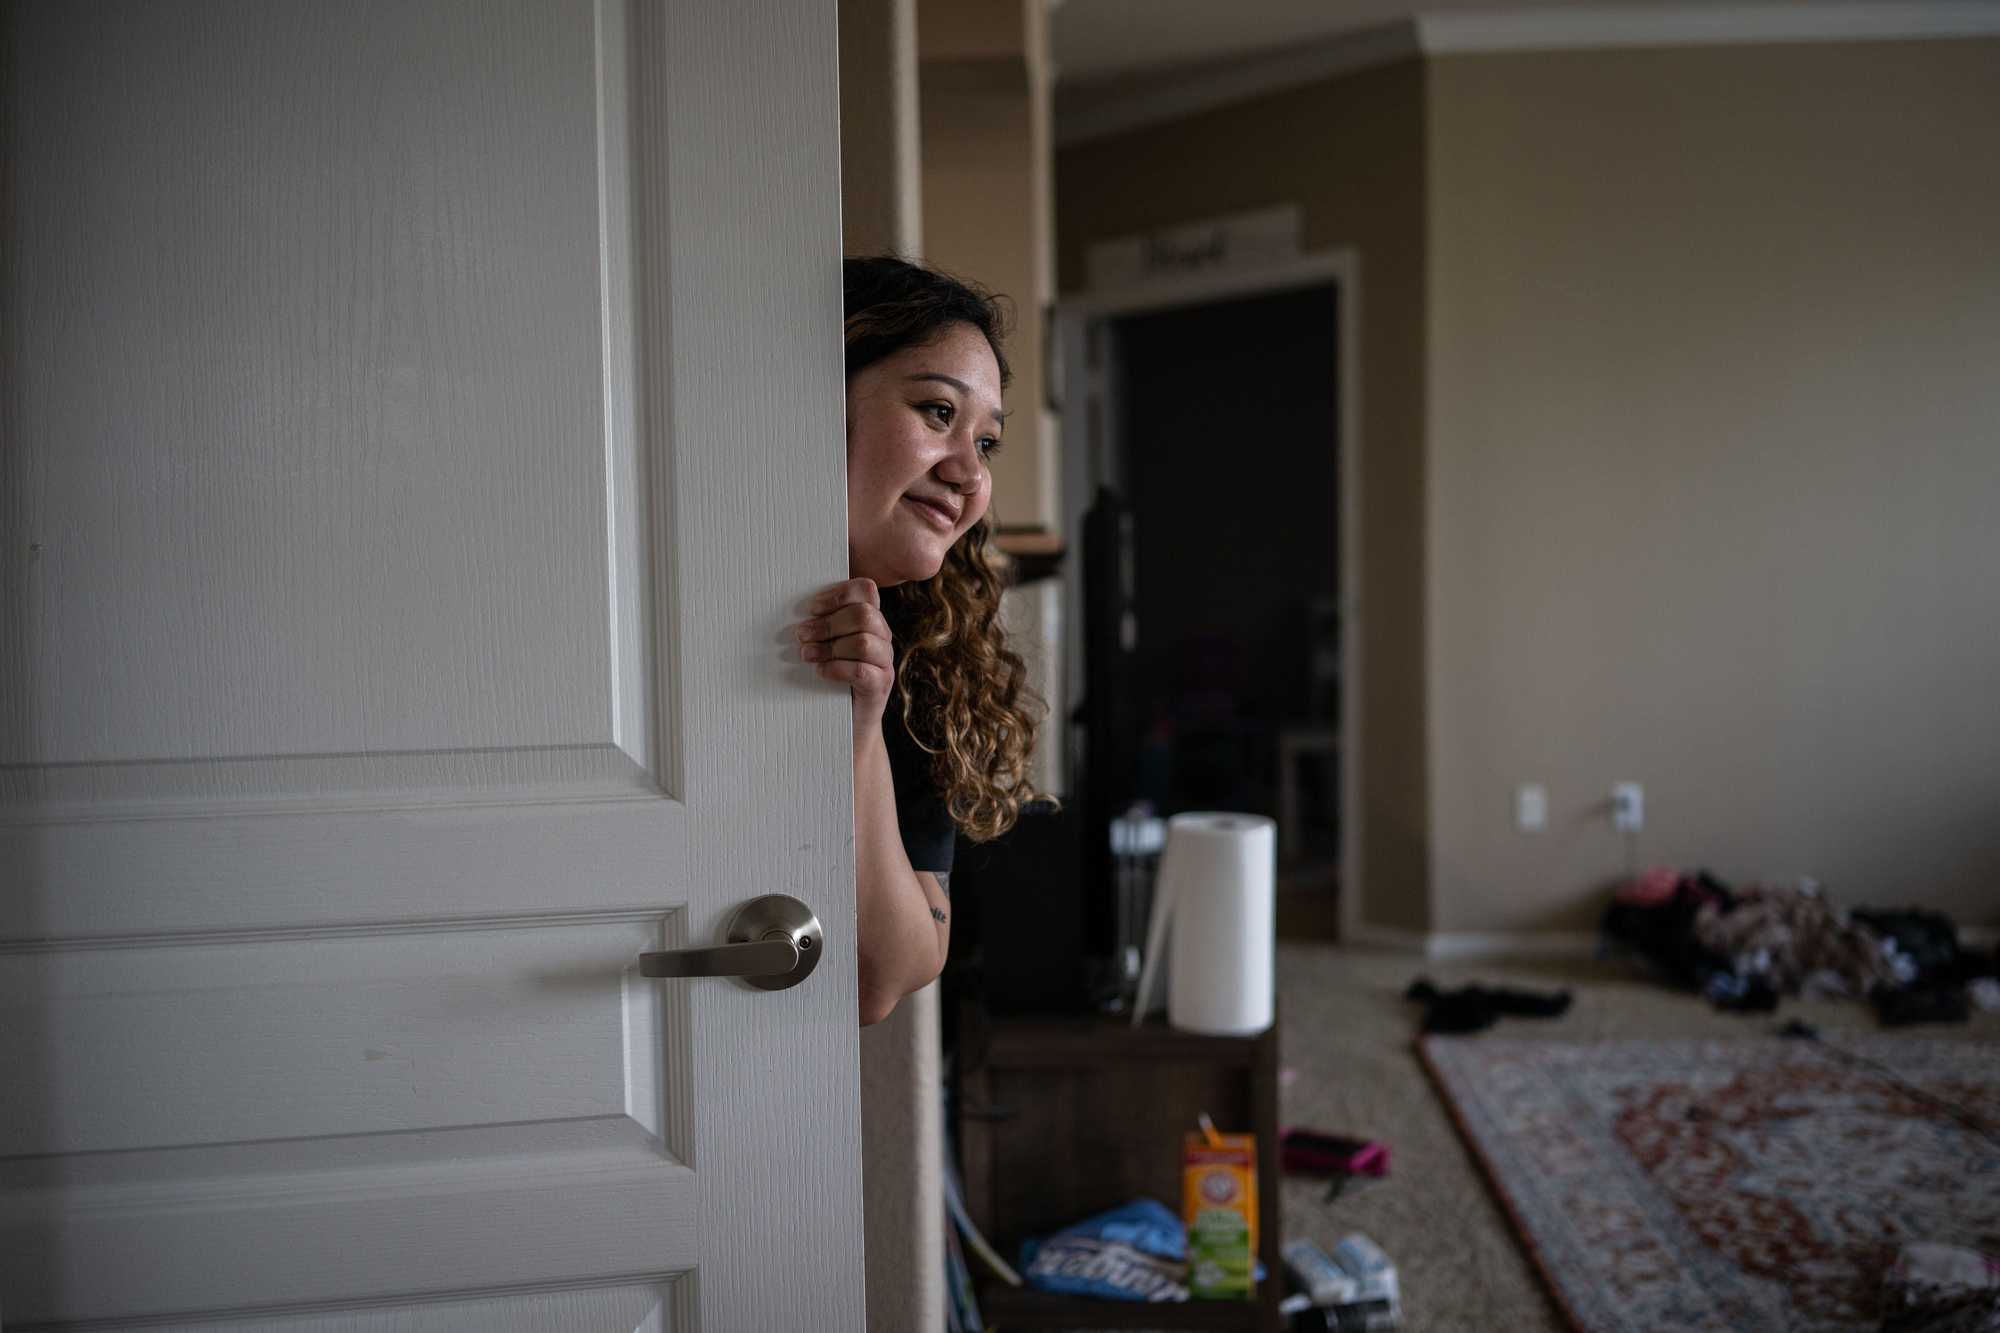 Osuna checked in on her daughters at their apartment. "Having more time for your kids and not feeling so much stress means you can be a better parent,” Osuna said. “You can be more aware of what’s going on with your child.” (Tamir Kalifa for The Boston Globe)